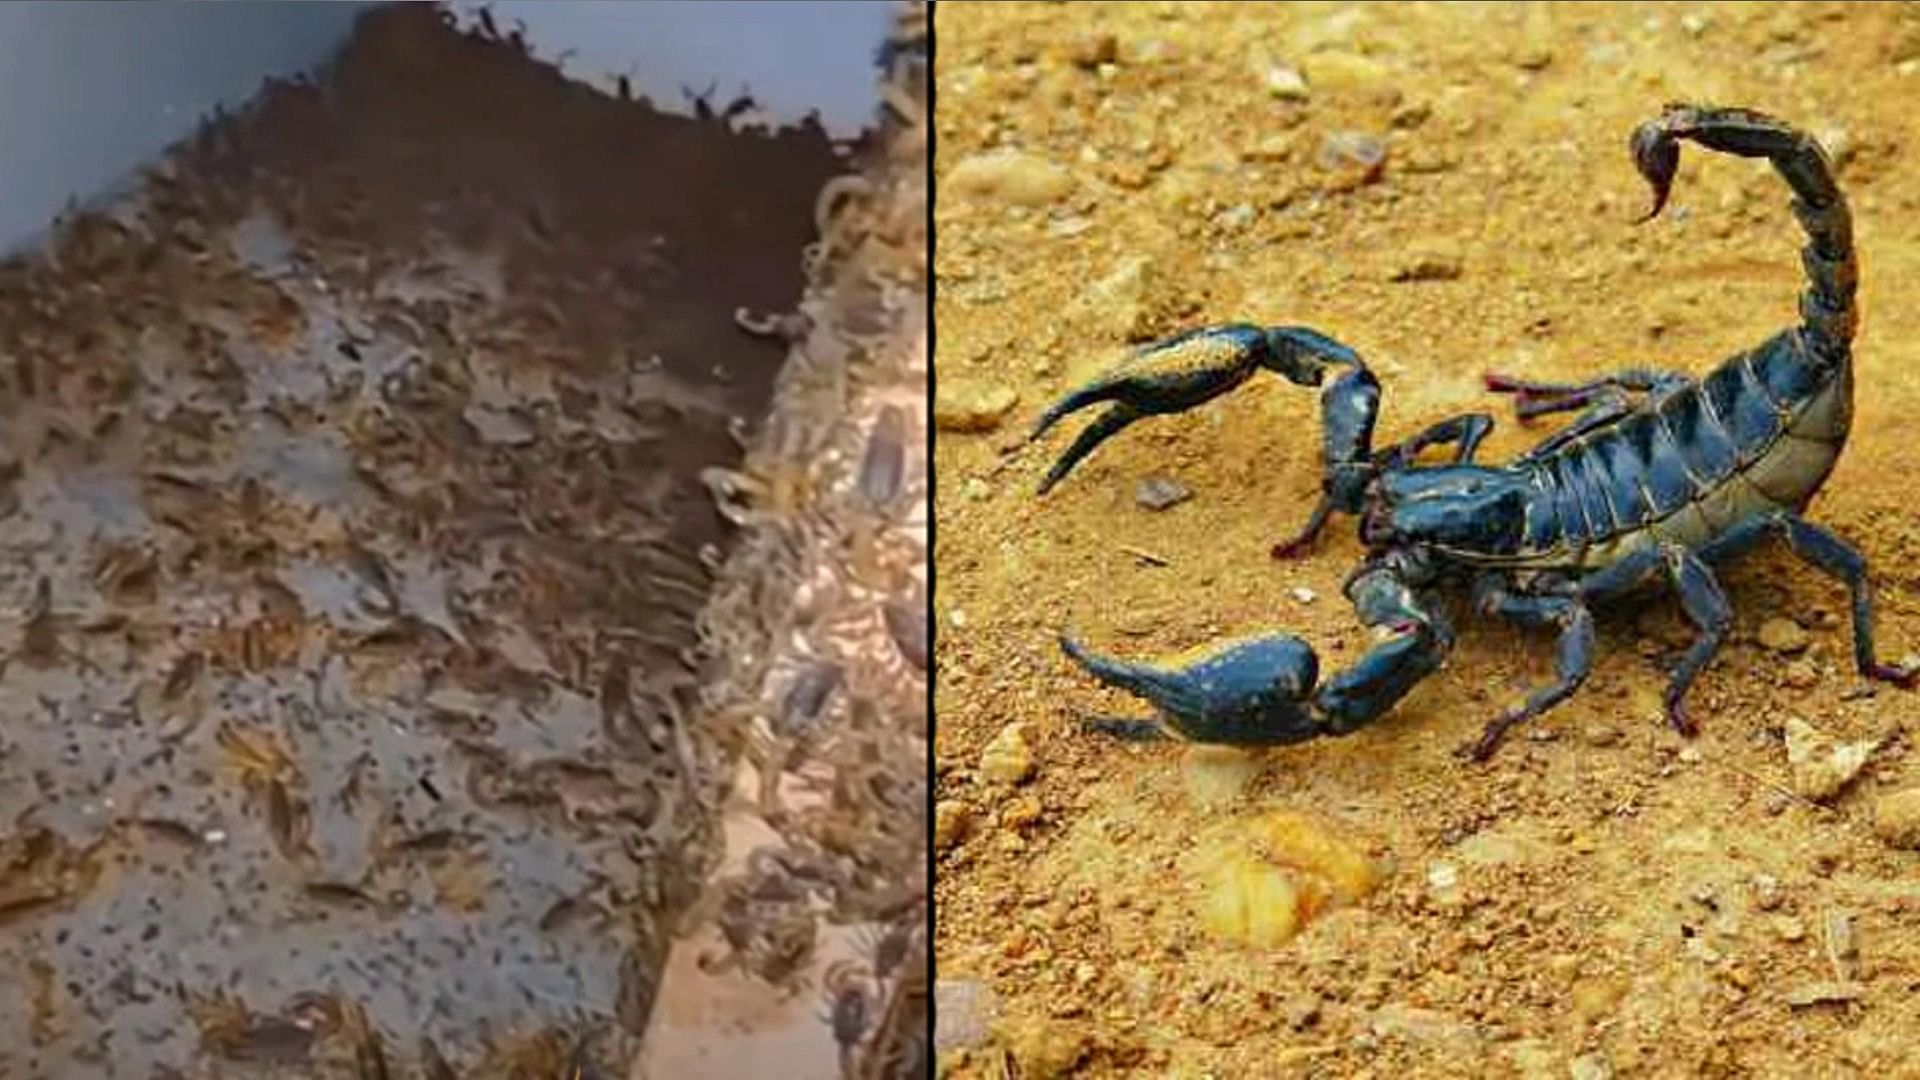 Scorpions Video Viral Millions of scorpions were seen crawling all around the house